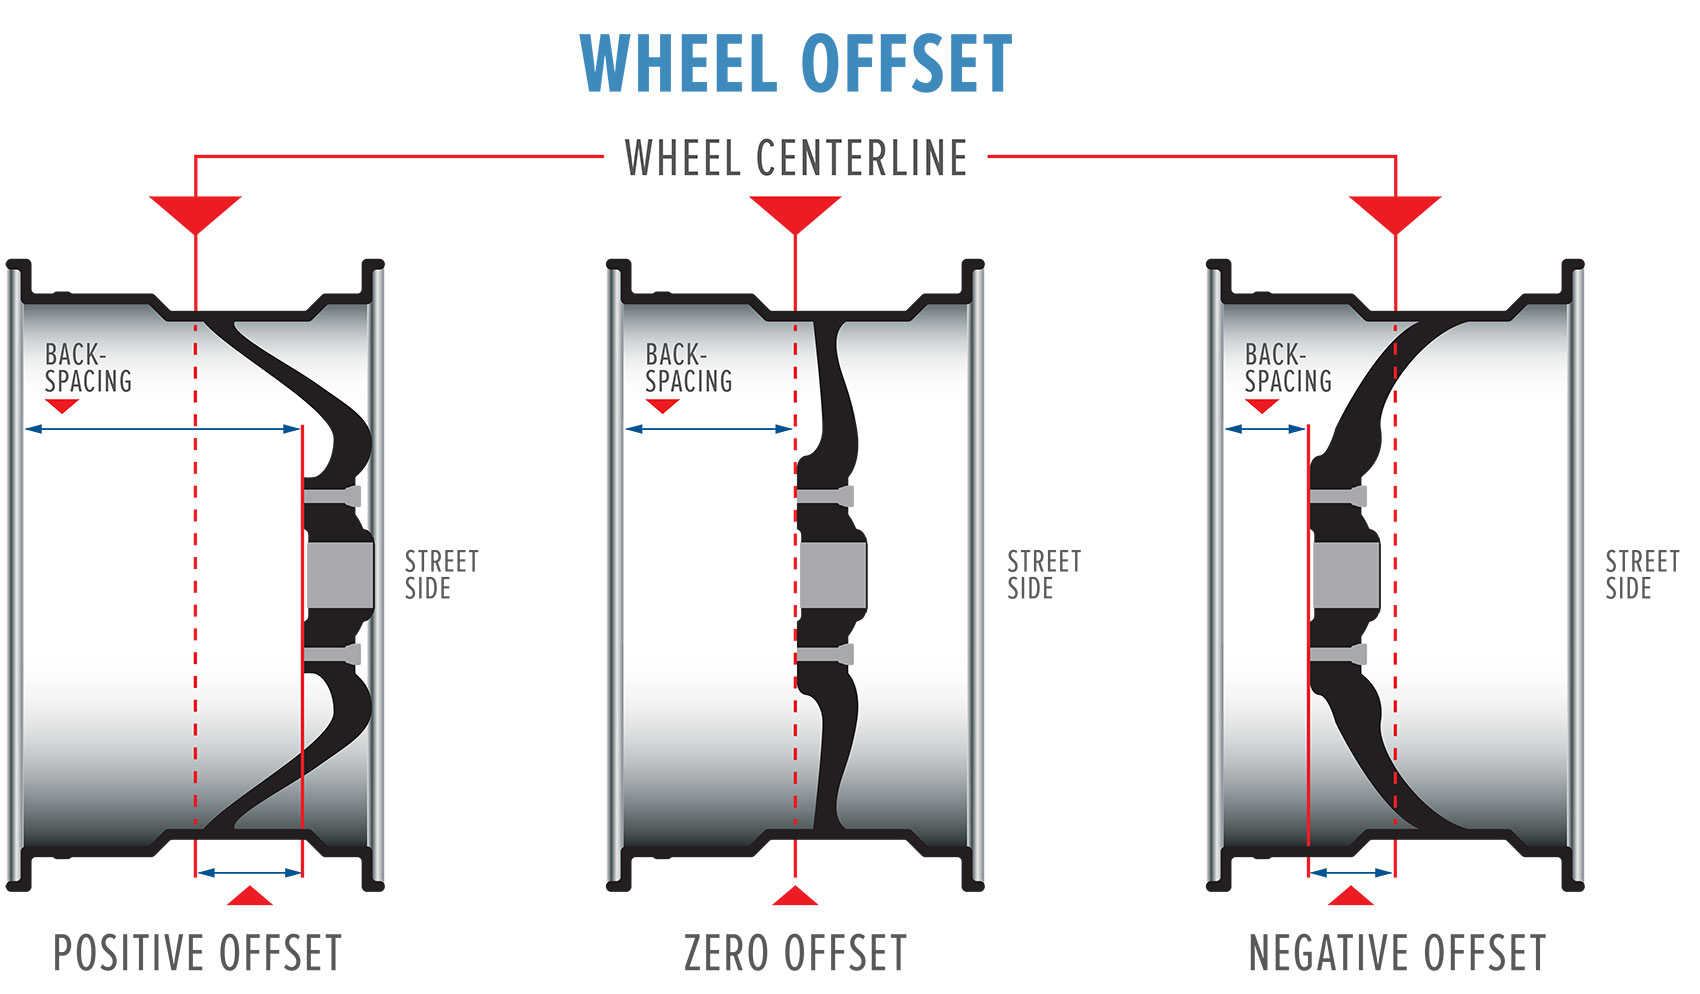 Wheel offset explained, with positive offset, zero offset and negative offset